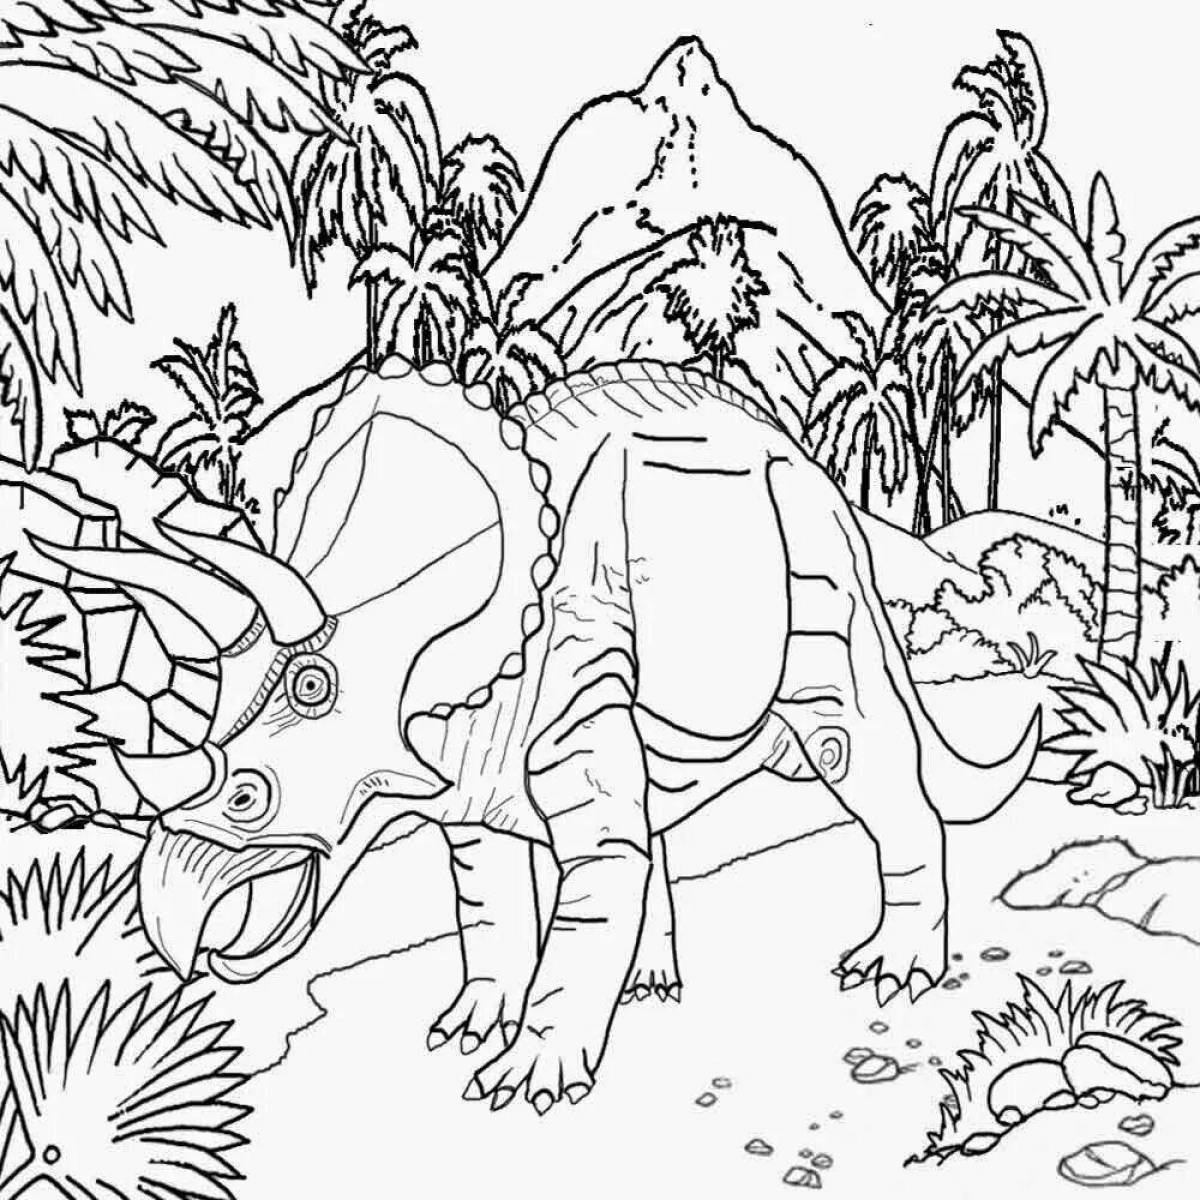 Colorful jurassic world 3 coloring book